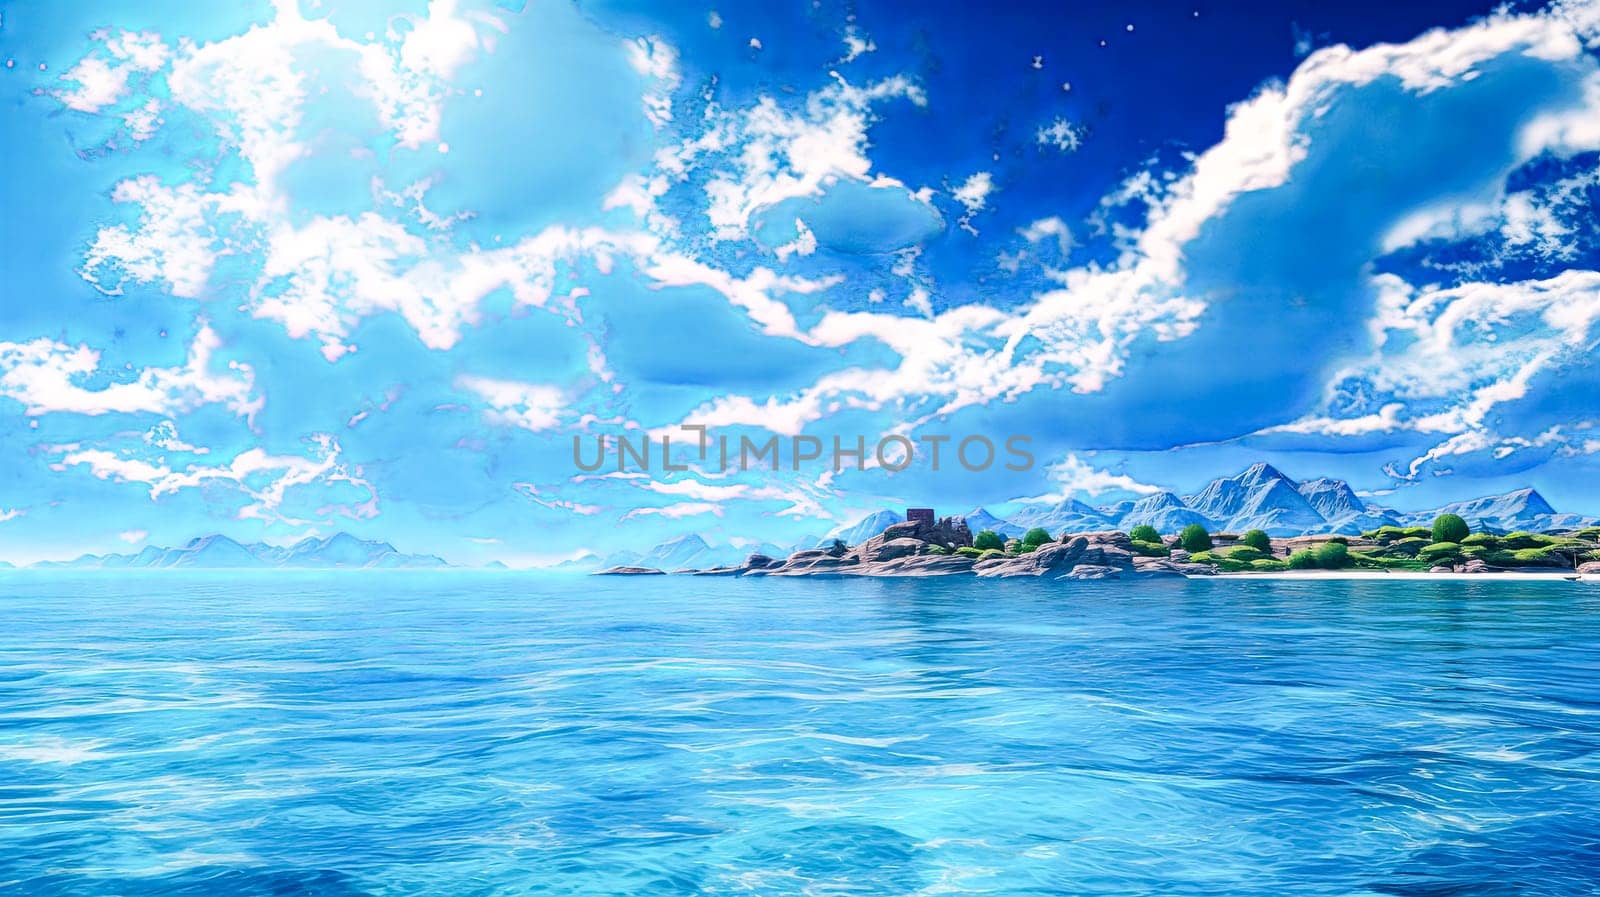 A serene scene captures the beauty of a clear blue sky adorned with fluffy clouds above a tranquil ocean, evoking a sense of peace and serenity.